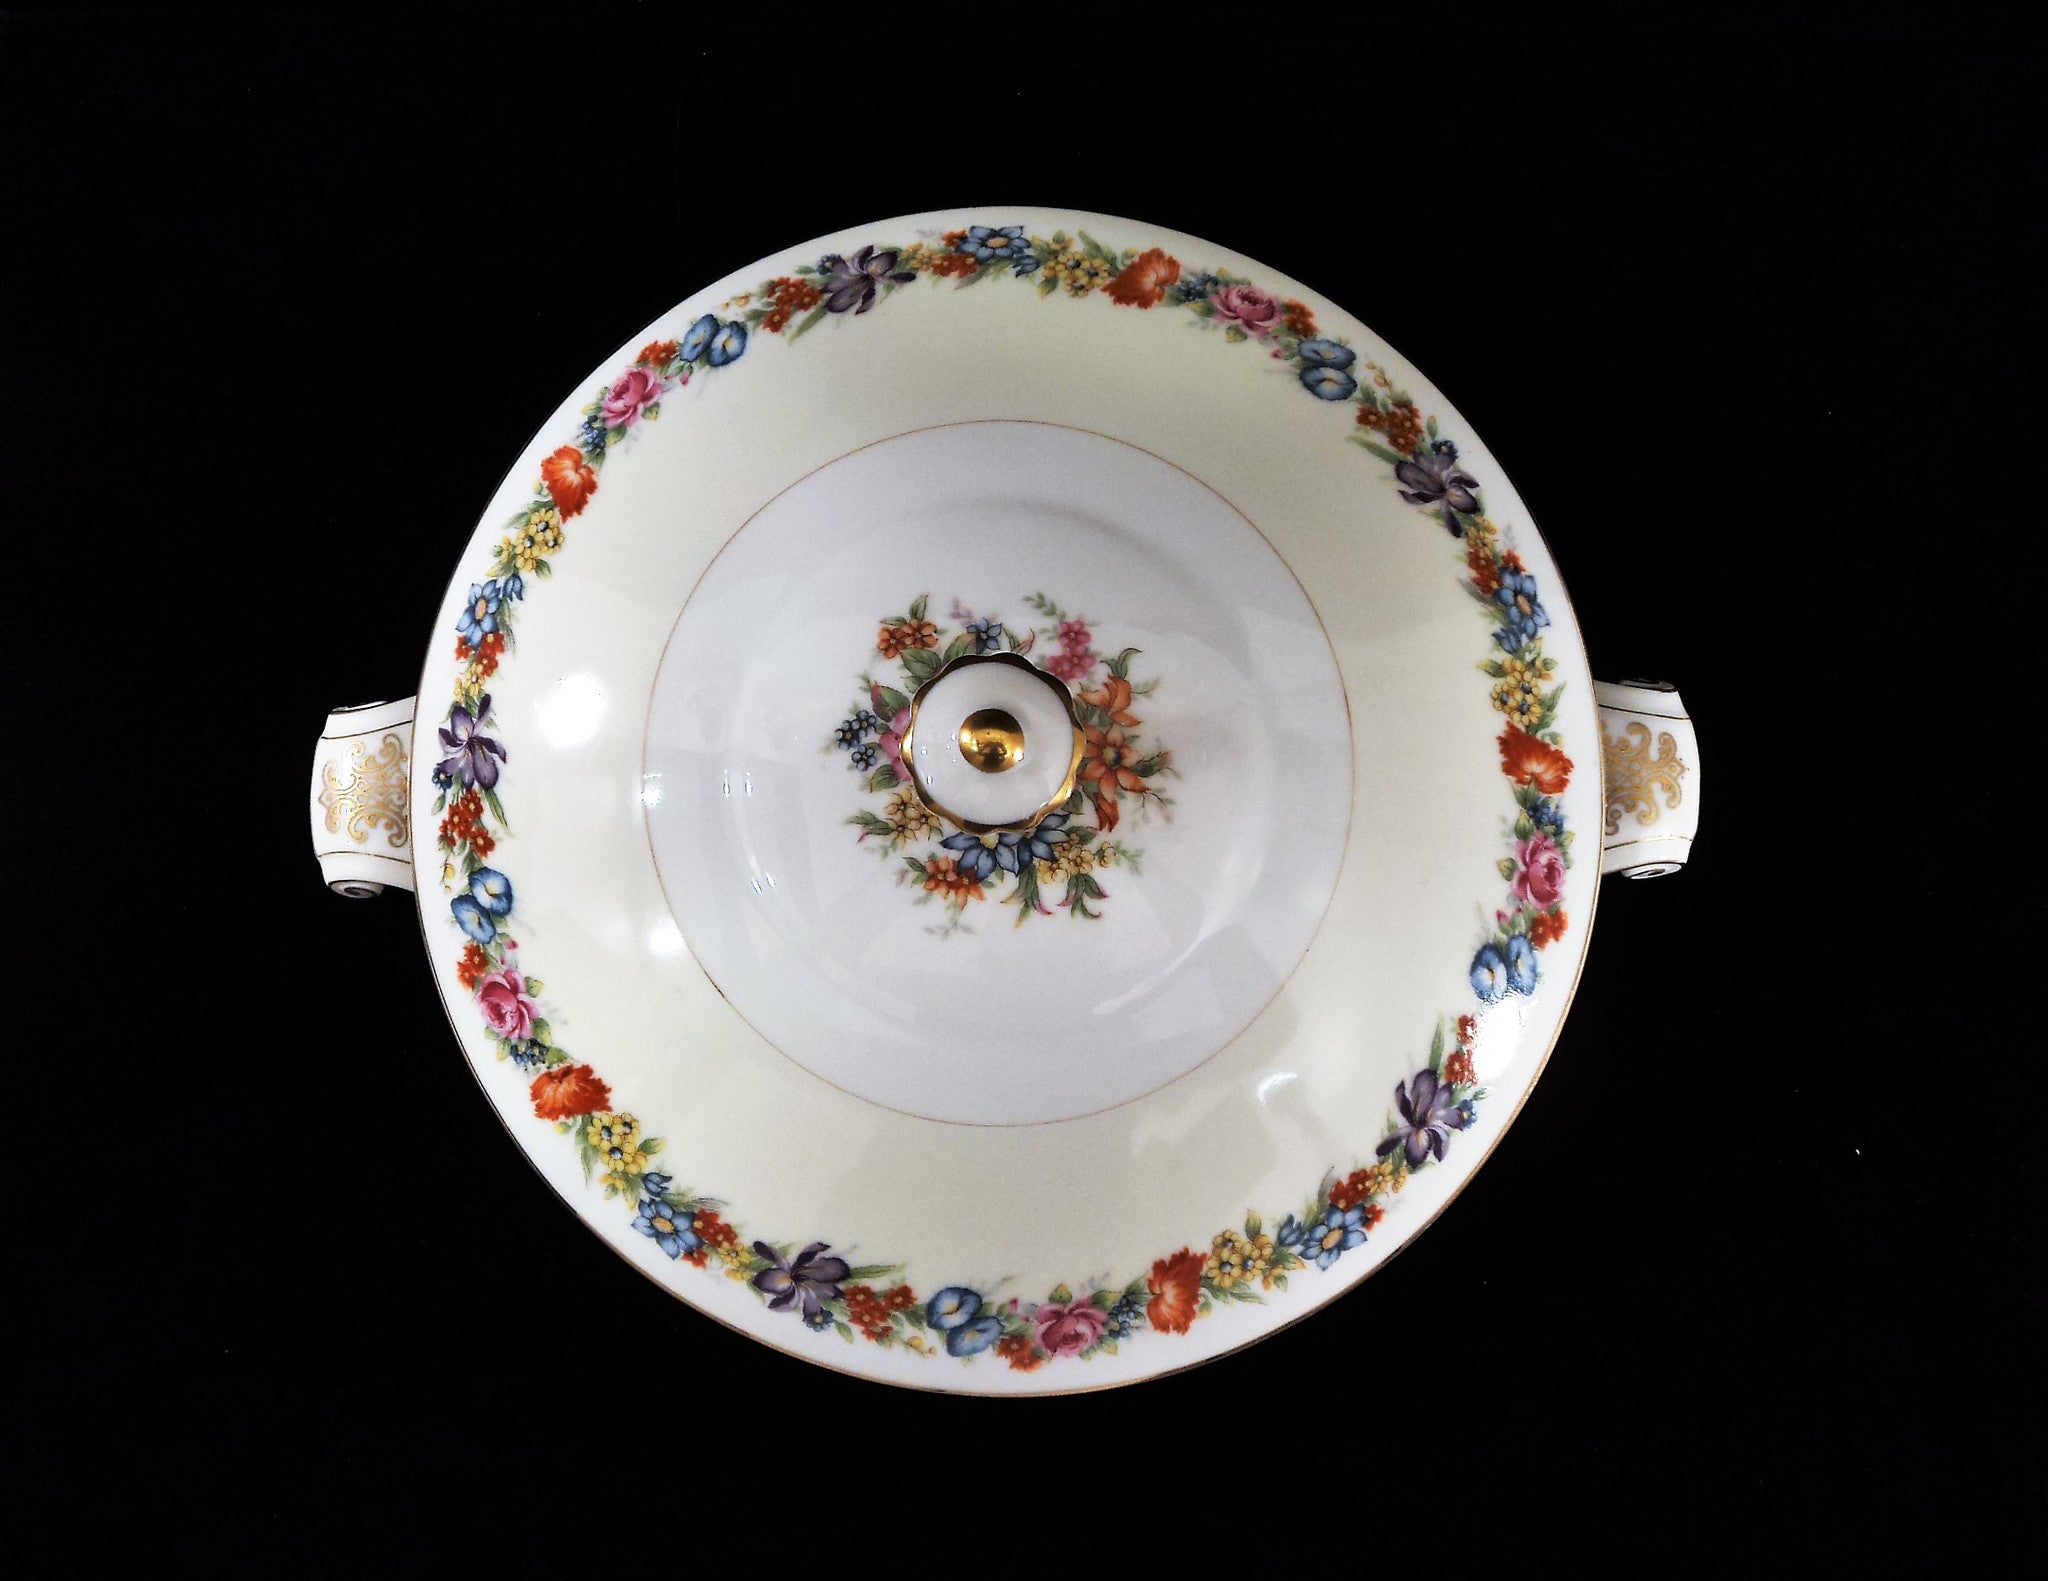 Narumi Porcelain Occupied Japan Covered Tureen